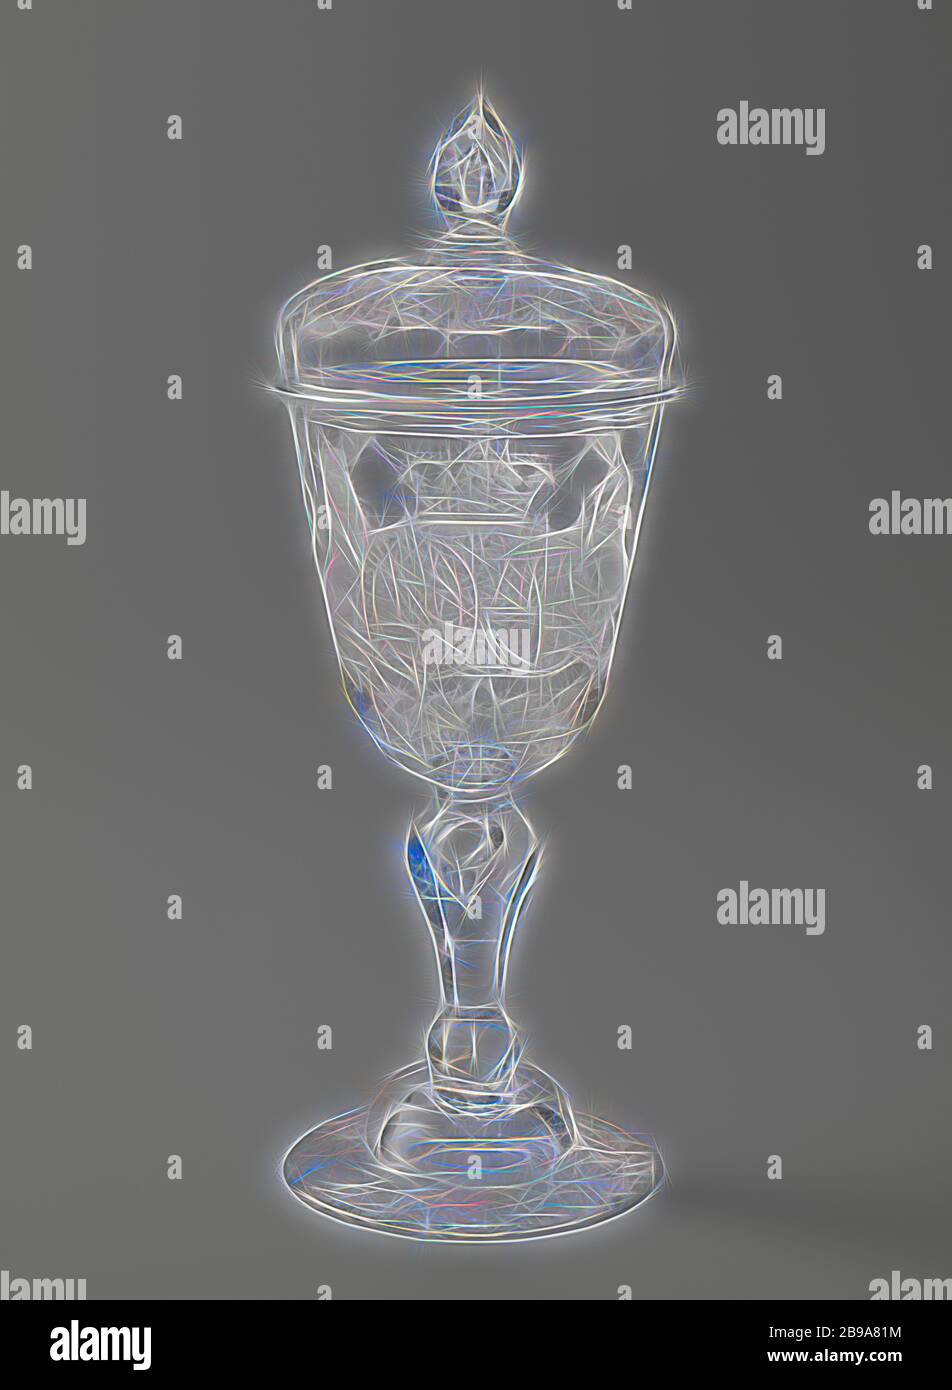 Lidded goblet with the alliance arms of William IV and Anne of Hanover Cup with lid, with the alliance weapon of Willem IV and his wife Anna van Hannover, Bell-shaped arched foot. Baluster stem with button and air bubble. On the one side the conical chalice the engraved coat of arms of Stadholder Prince William IV (1711-1751) and his wife Anna van Hannover (1709-1759) and the text HONI.SOIT. QUI.MAL.Y.PENSE. and JE MAINTIENDRAI 17-47. On the other side of the jar the weapons of the seven united provinces and the text UTRUPUS.IMMOTA.MARI STANDT FOEDERE JUNCTI. Base and cover engraved with flowe Stock Photo